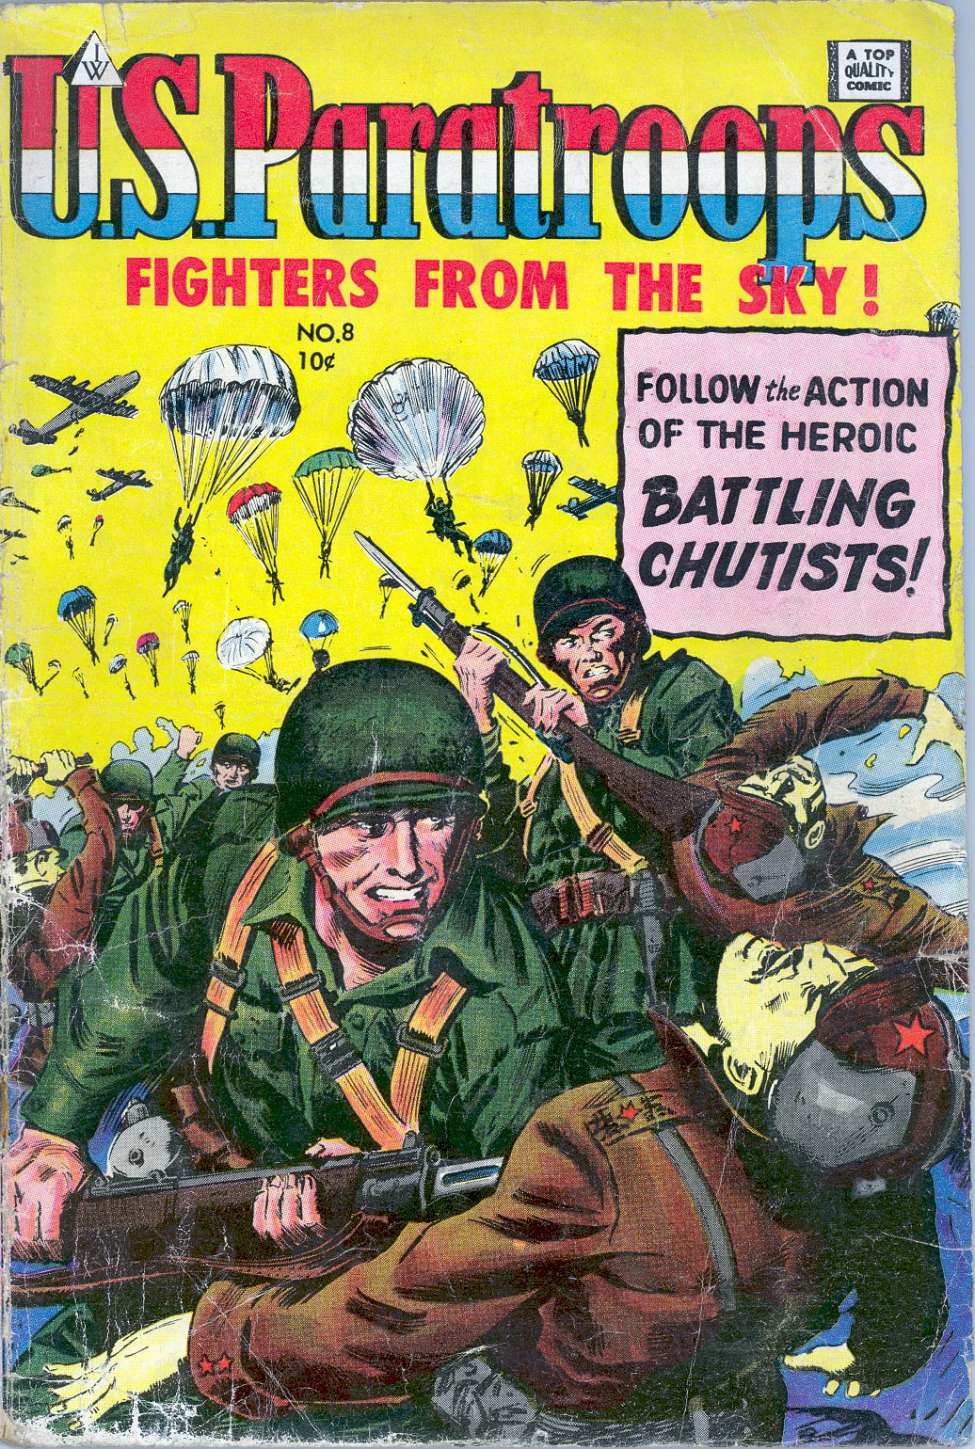 Comic Book Cover For U.S. Paratroops 8